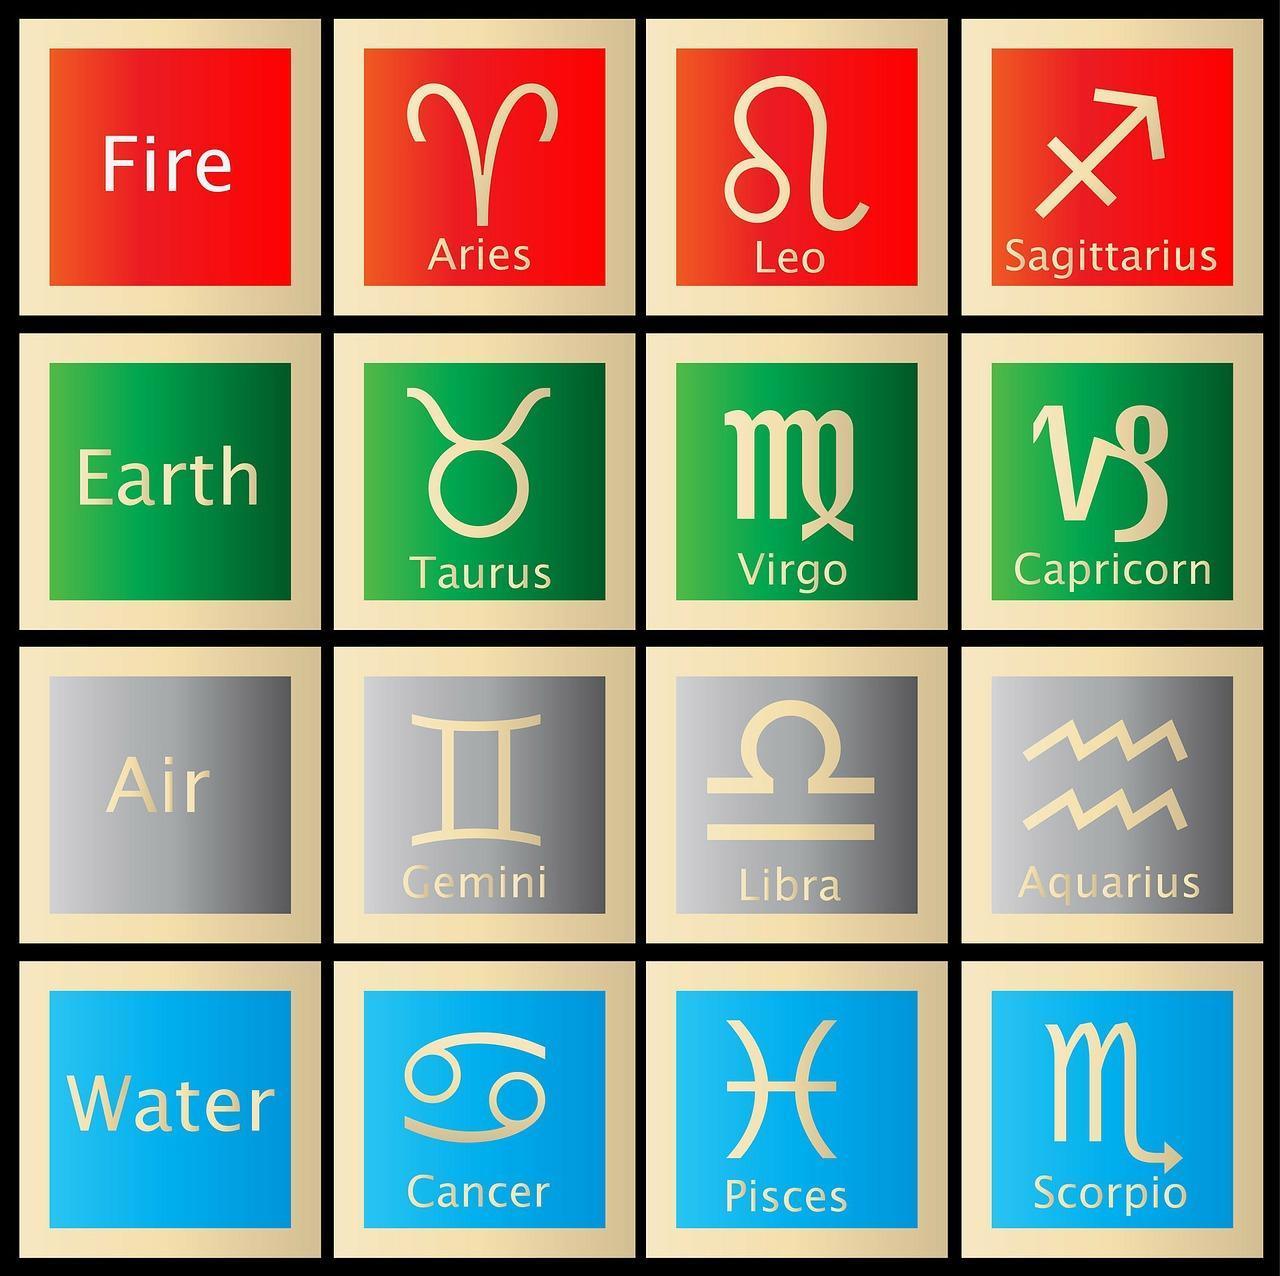 1. Determining Your Zodiac Sign